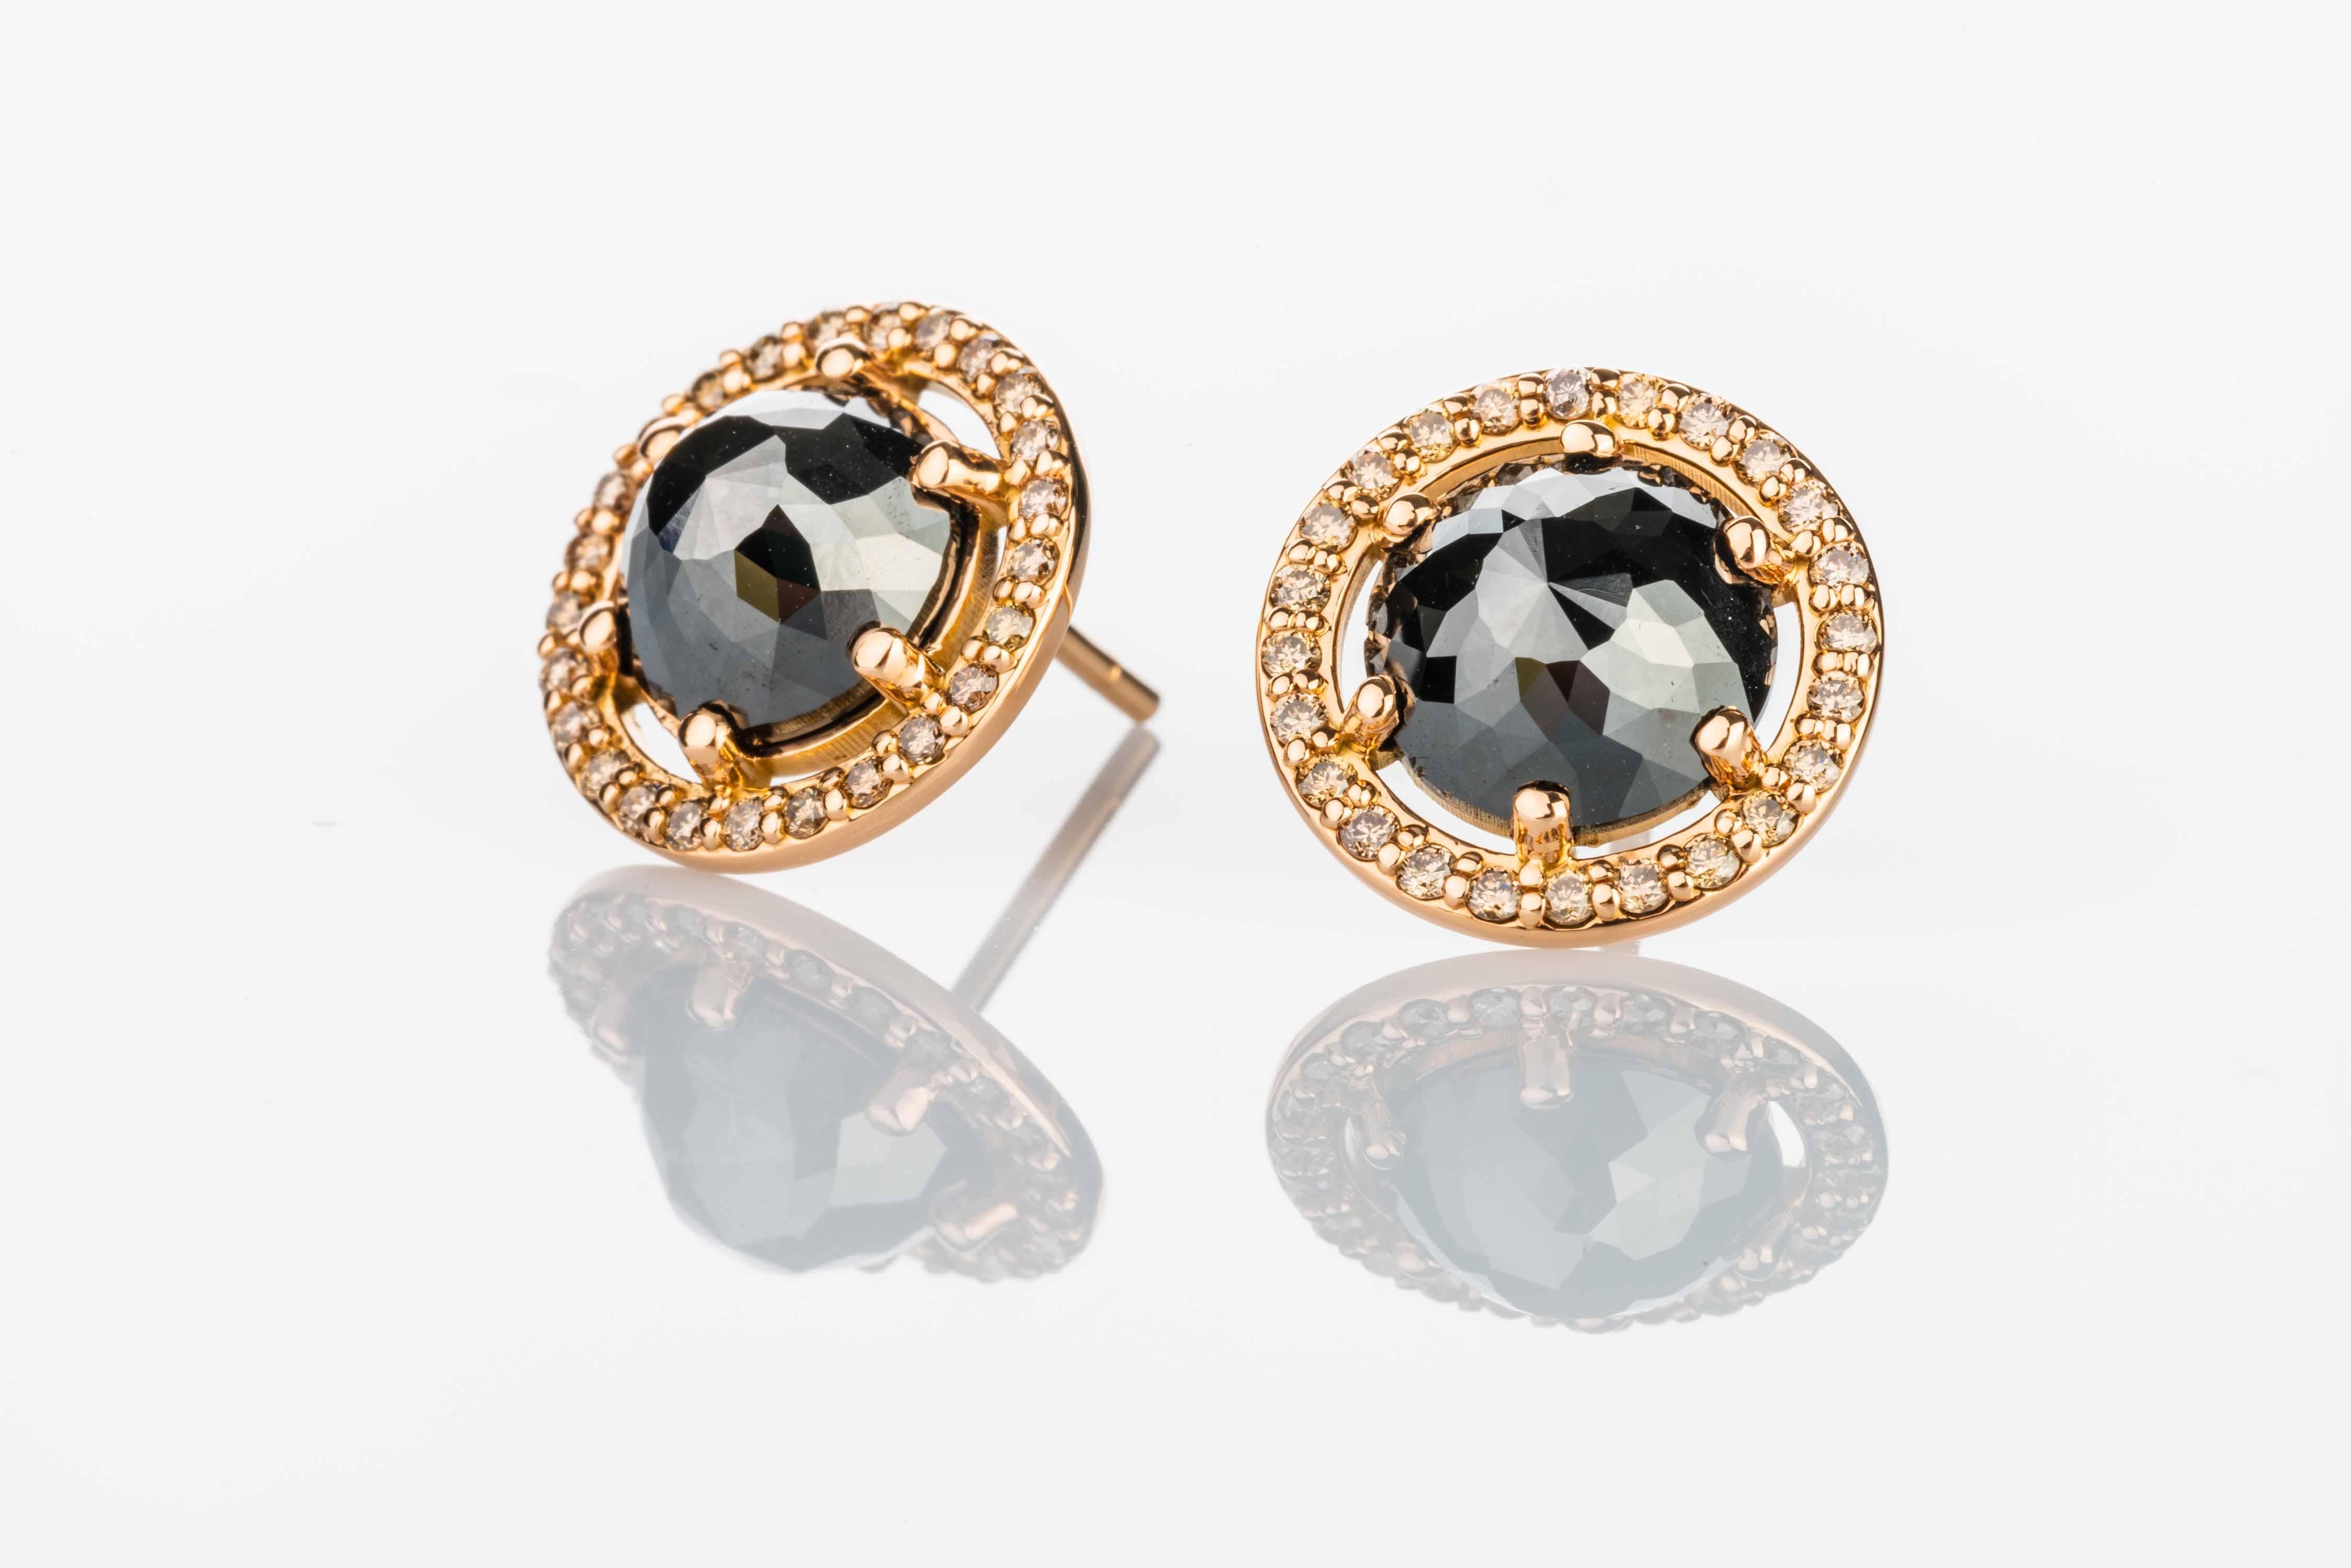 18k rose gold stud earrings with two rose cut black diamonds 3.8 total carat weight and 49 1.25mm champagne diamond halo .36 total carat weight. These Studs were made and designed by llyn strong.